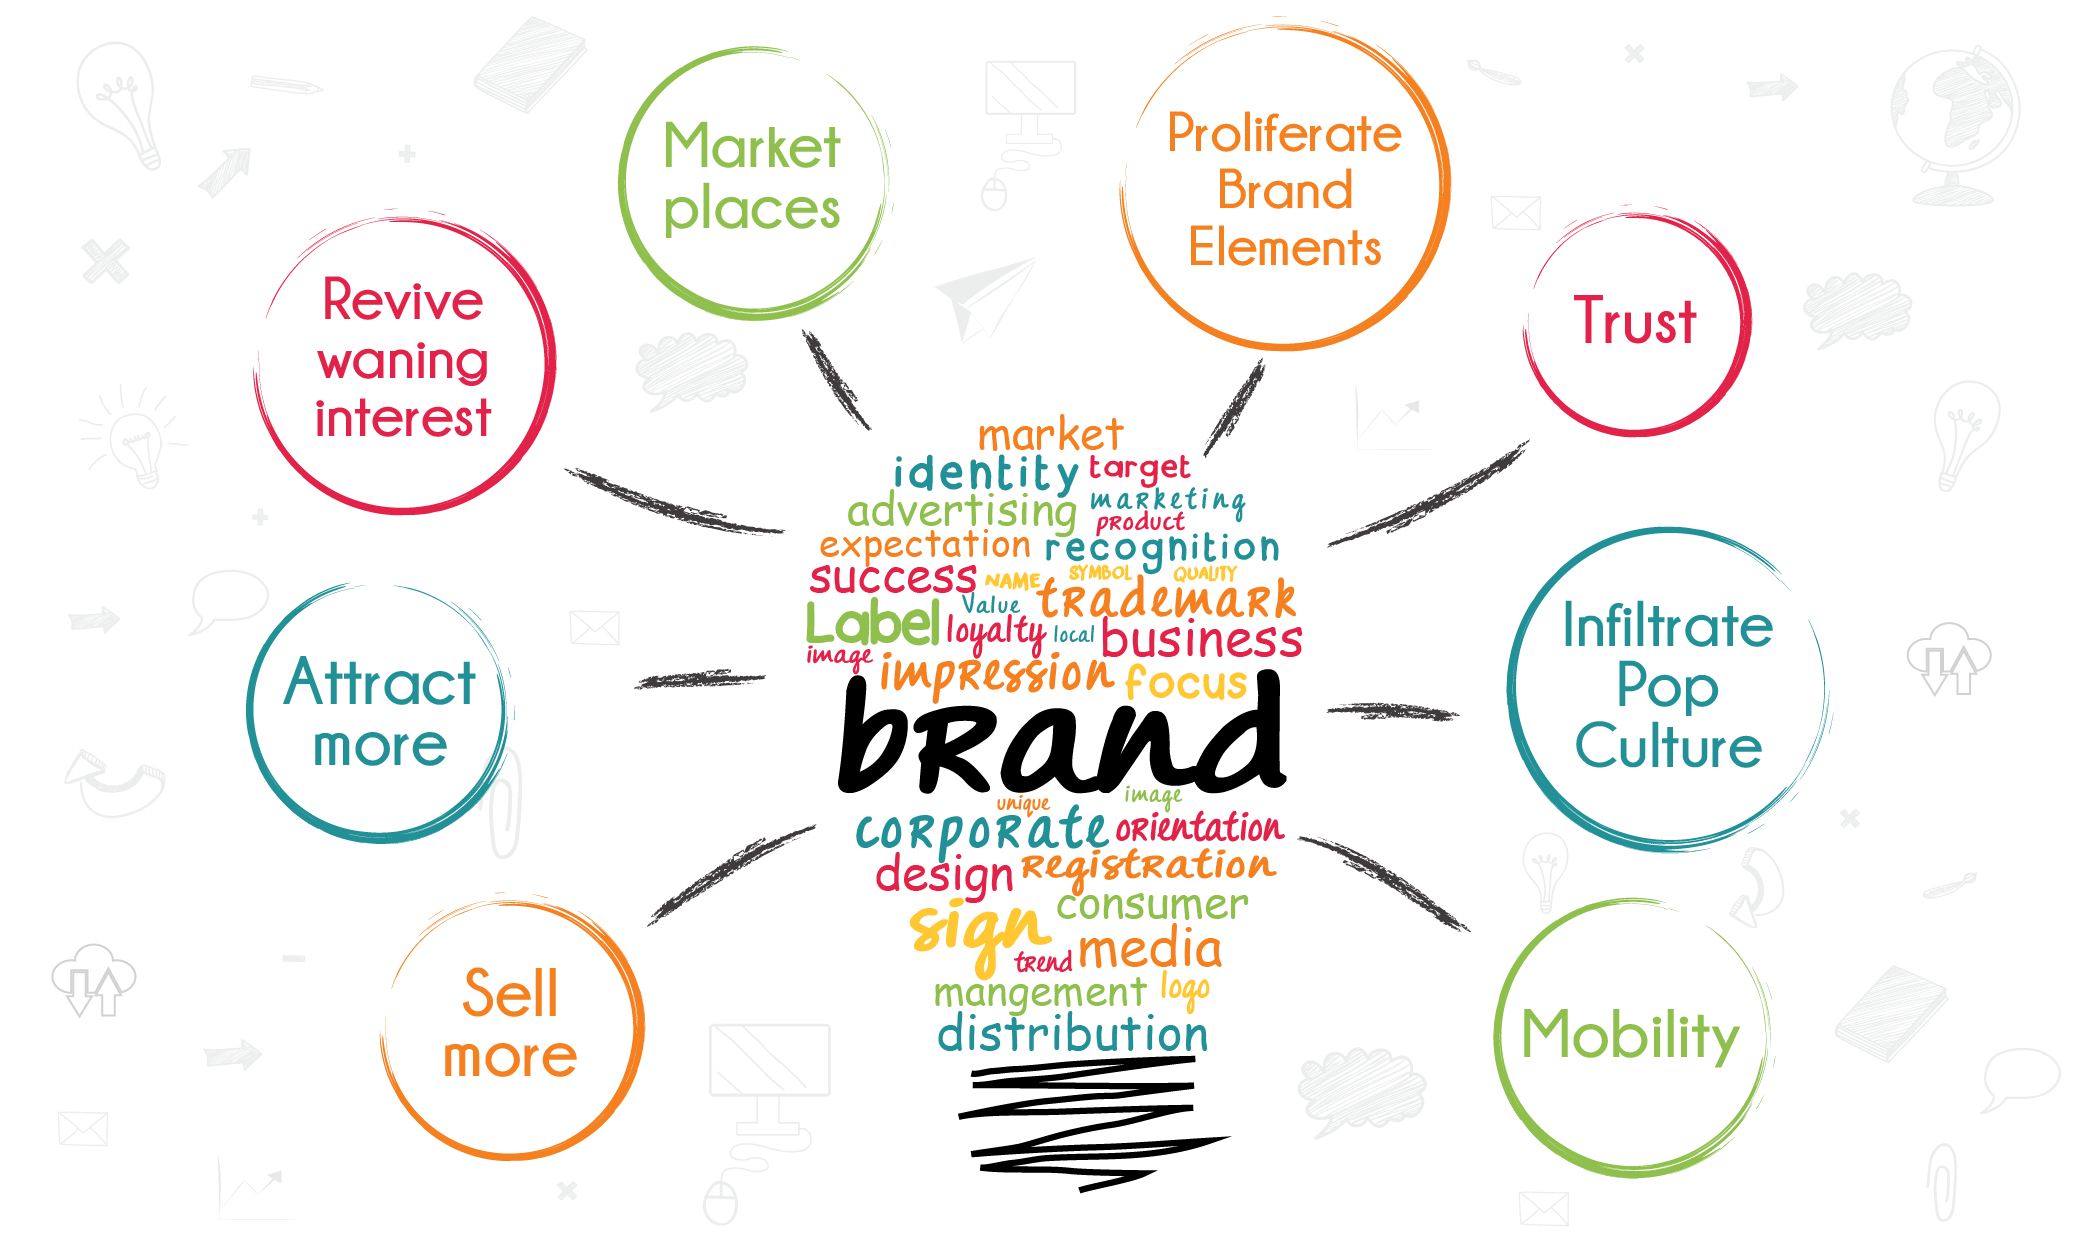 Increase Brand Visibility and Awareness